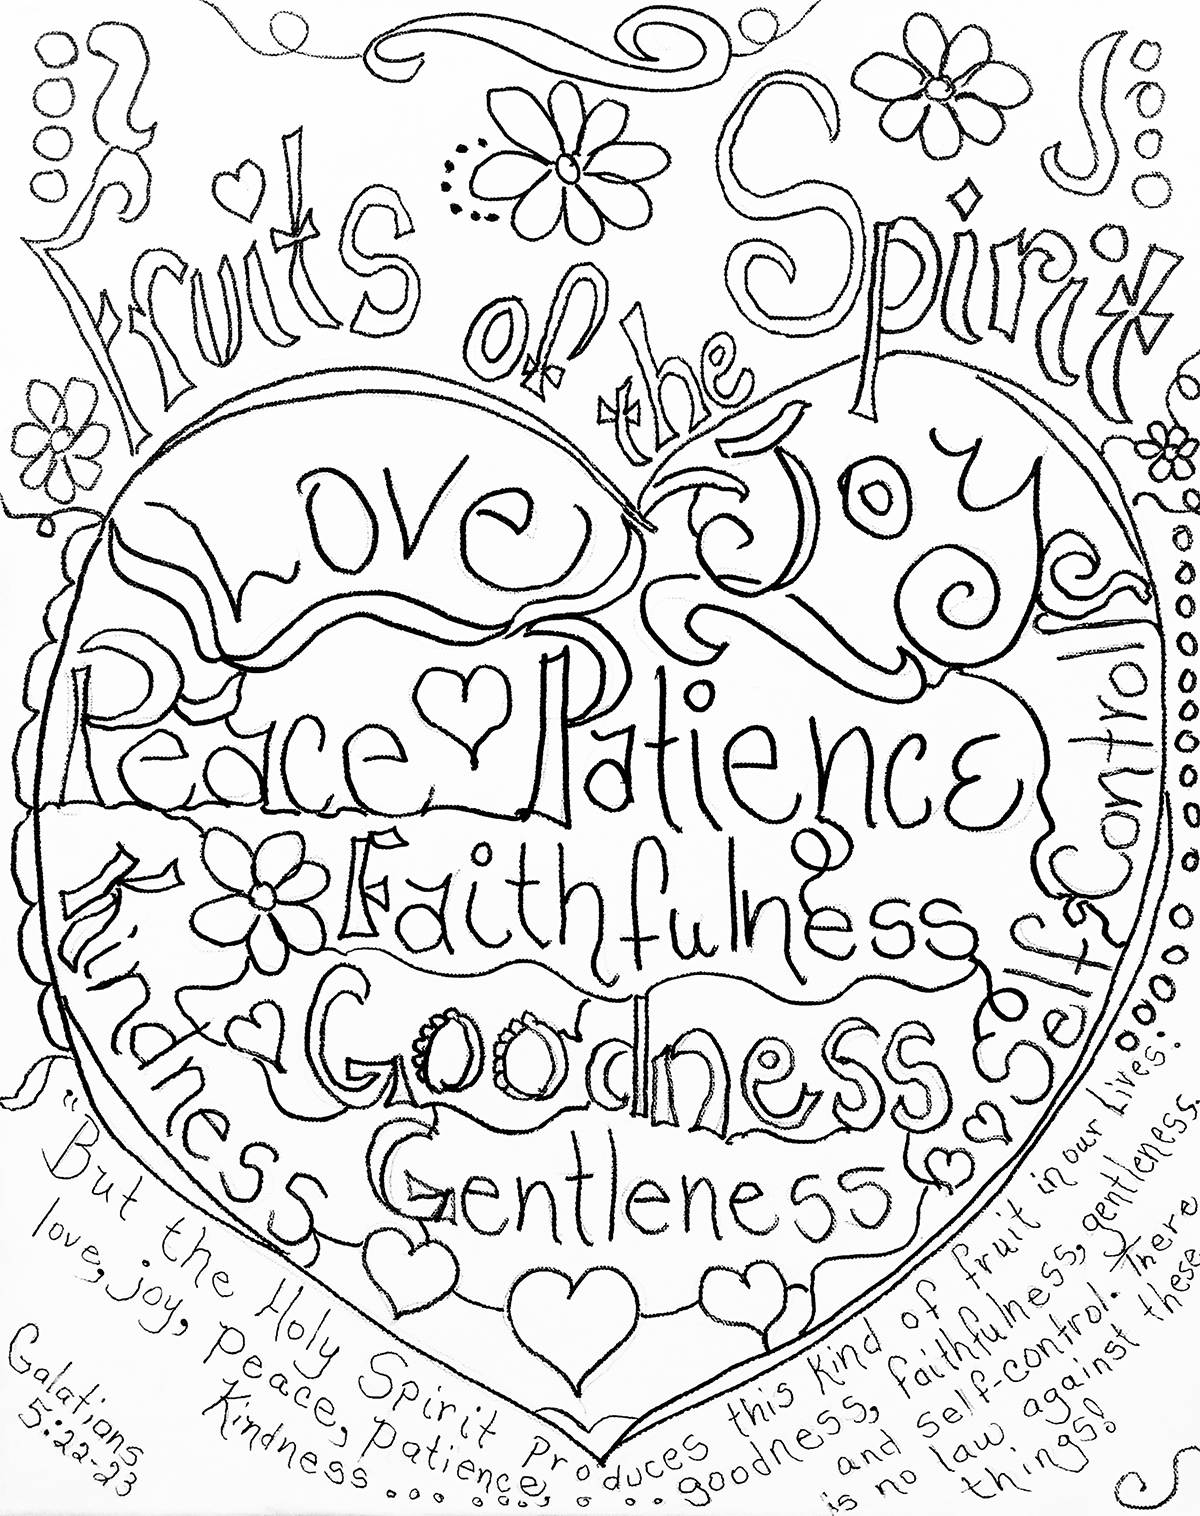 Fruits of the Spirit coloring page by Carolyn Altman. Galatians 5 ...